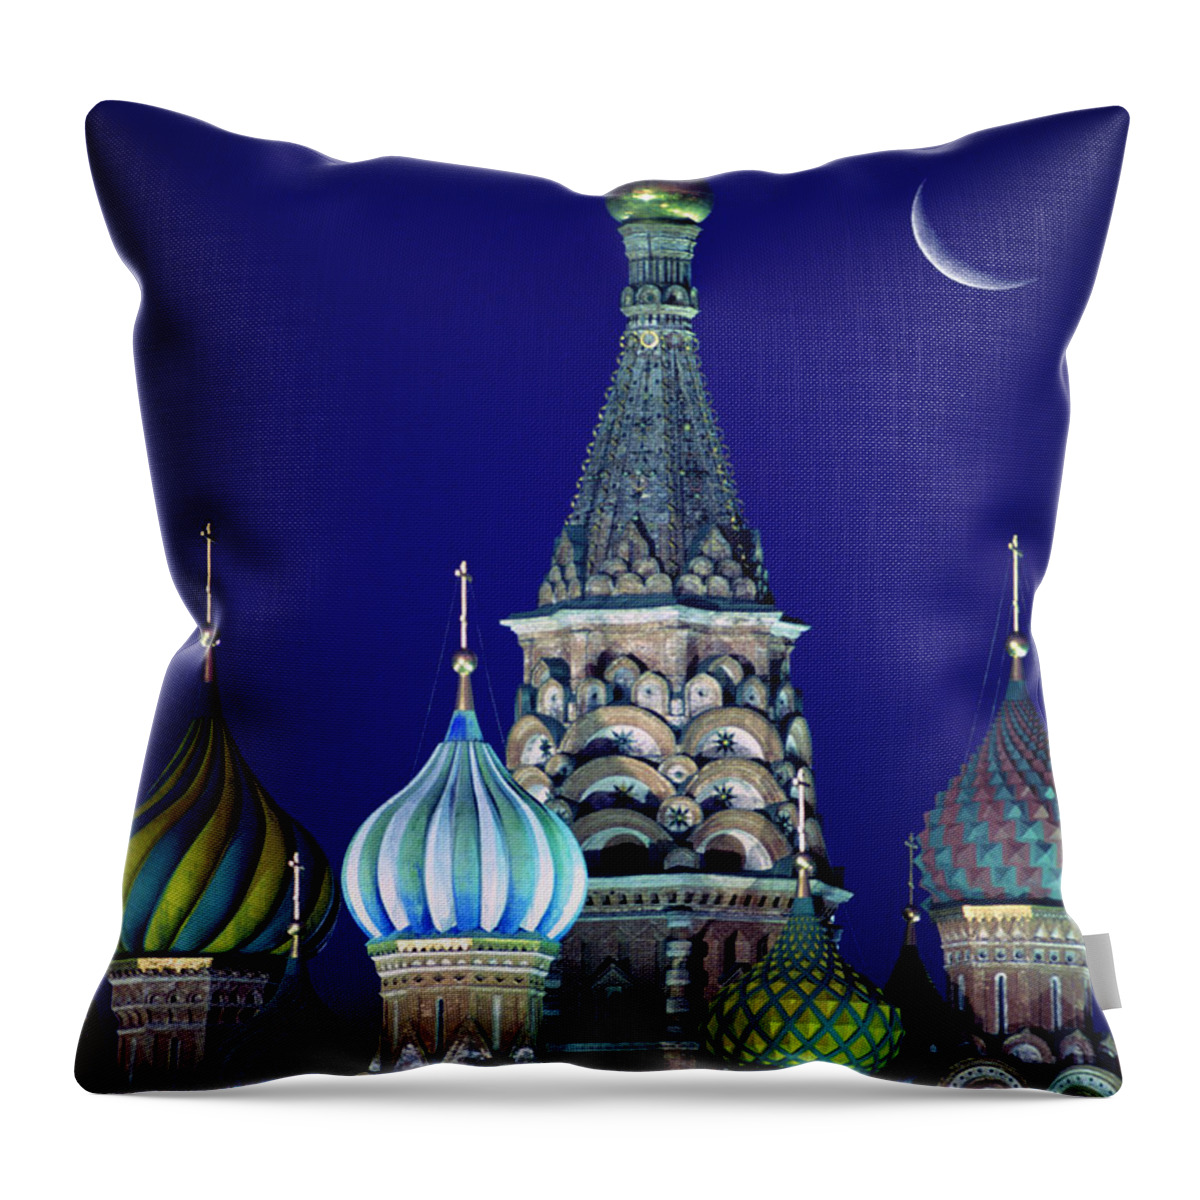 Clear Sky Throw Pillow featuring the photograph Russia, Moscow, Moon Over St Basils by Grant Faint